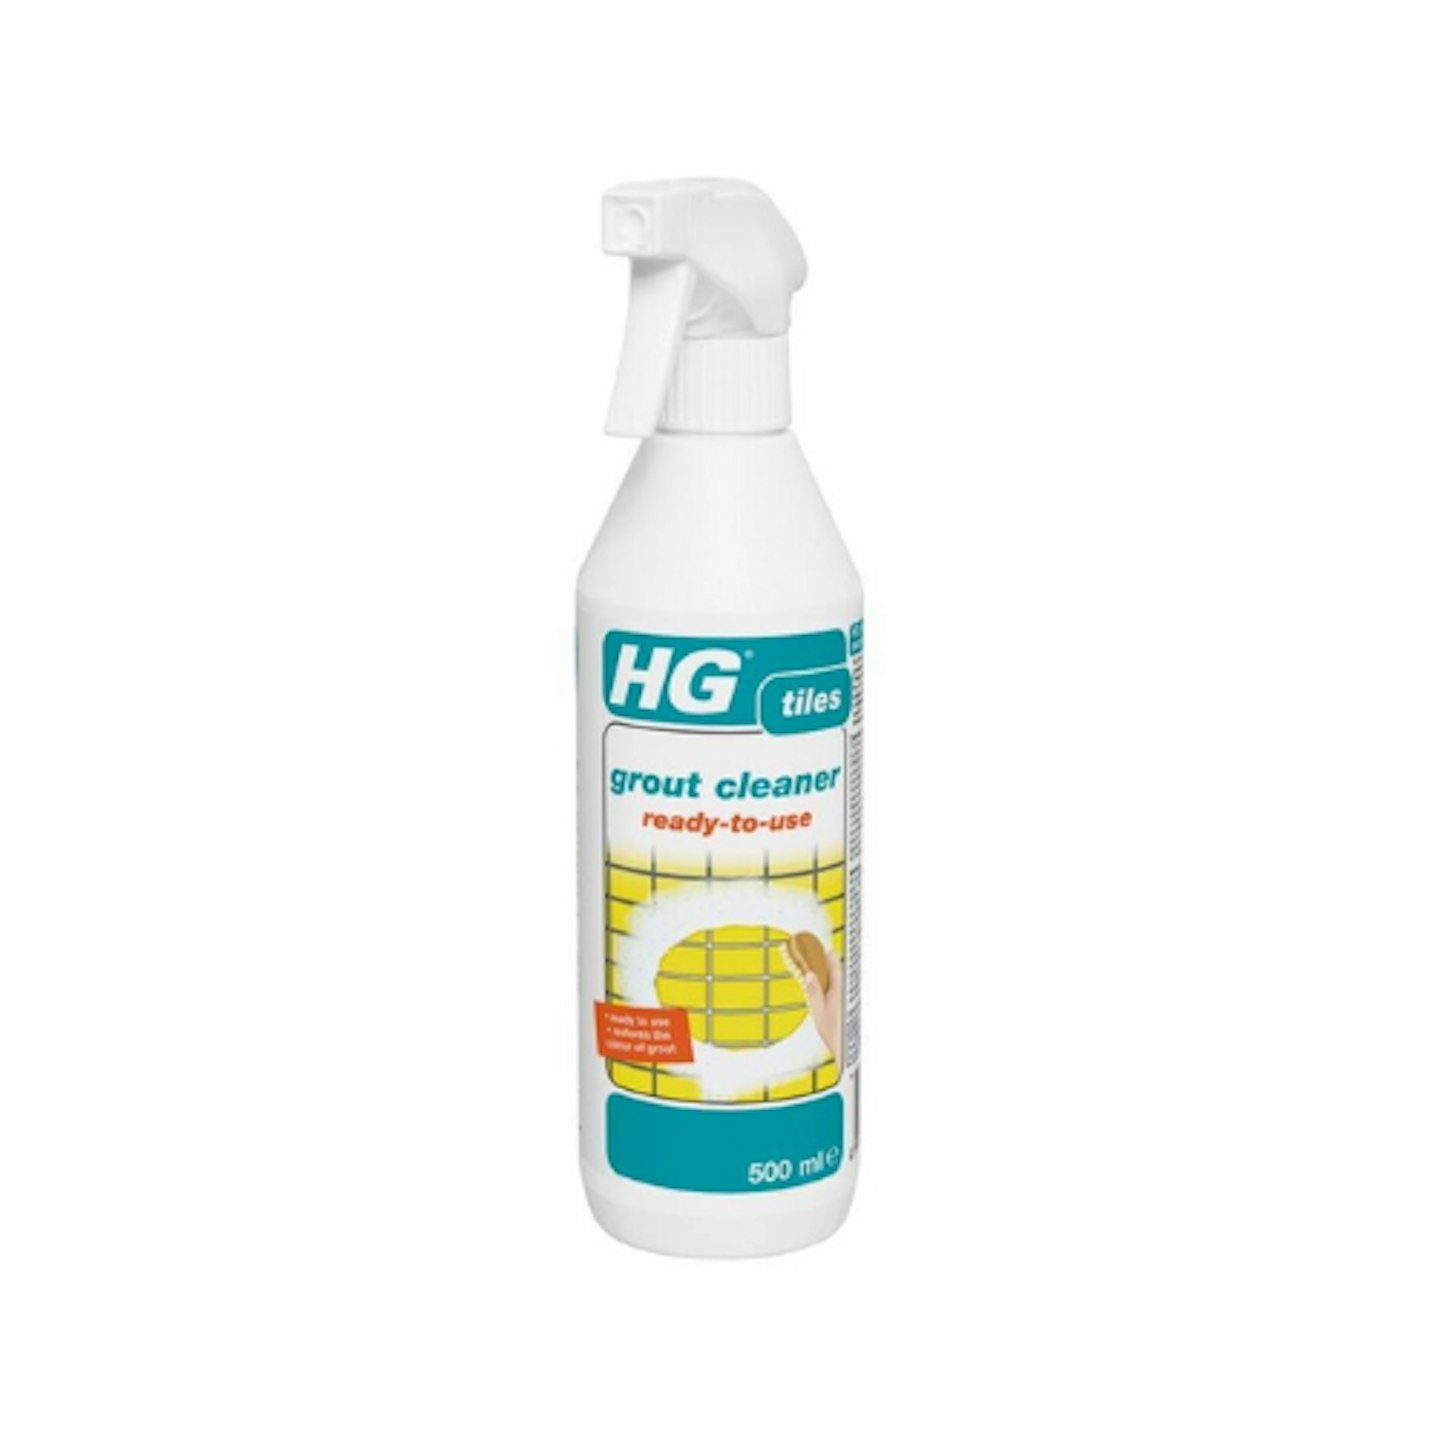 Ready To Use 500ml HG Grout Cleaner